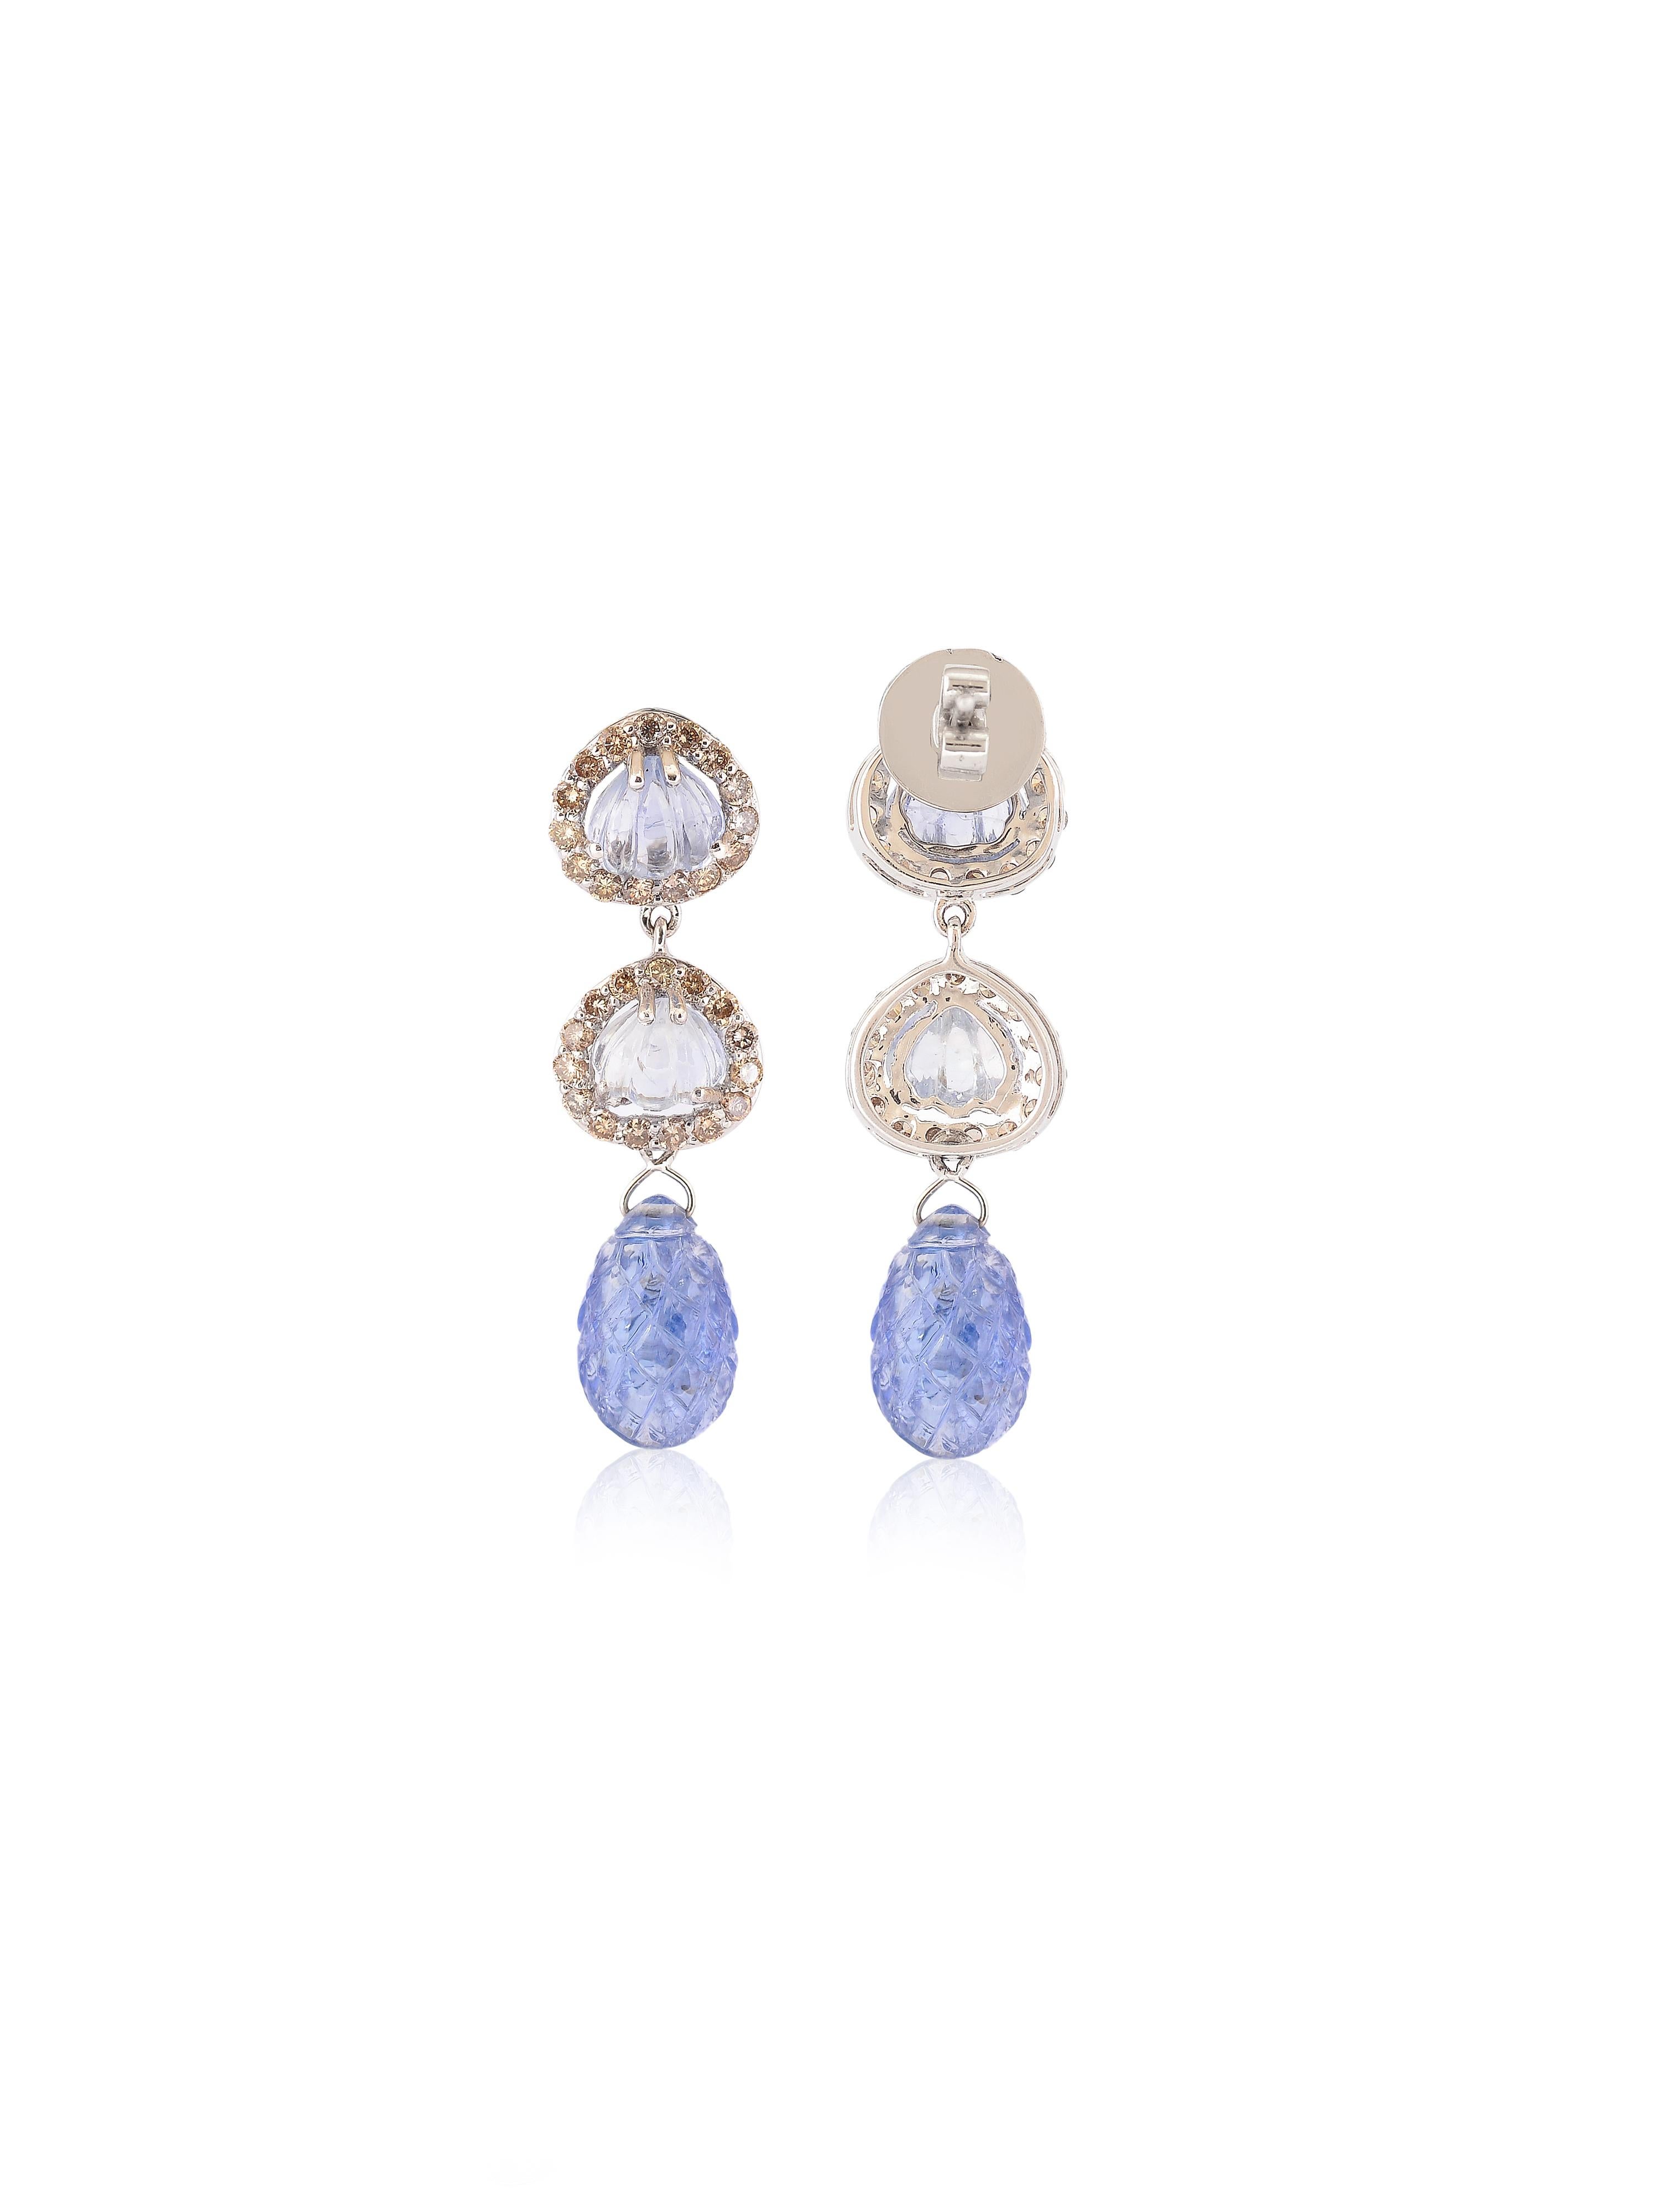 Art Deco Exquisite 16.49 Carats Natural Carved Sapphire Dangling Earring Pair For Sale